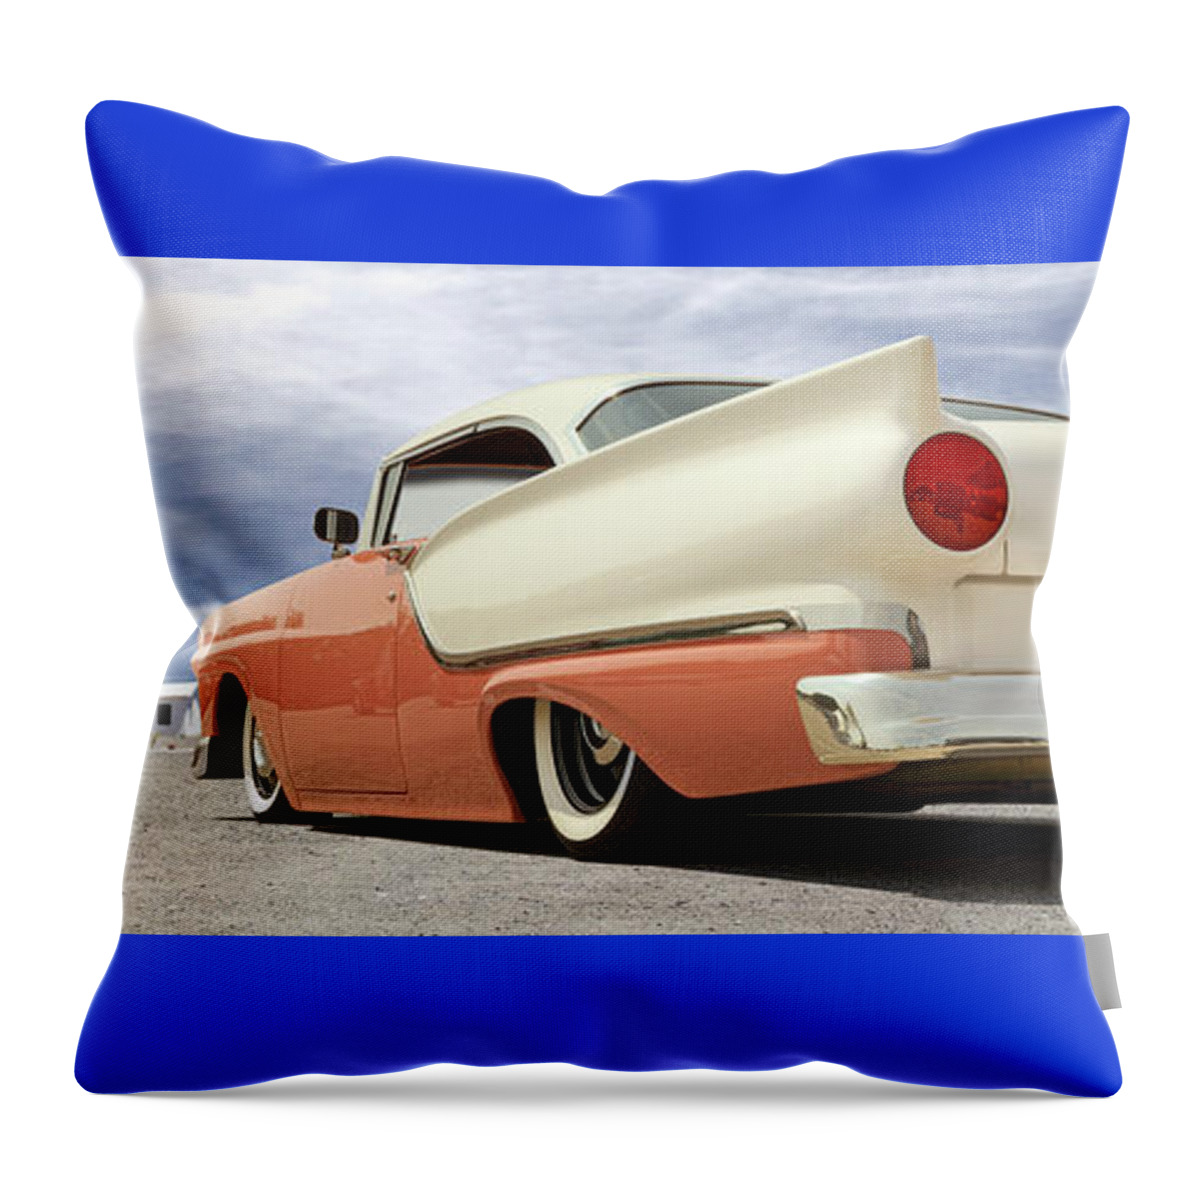 1957 Ford Throw Pillow featuring the photograph 1957 Ford Fairlane Lowrider by Mike McGlothlen